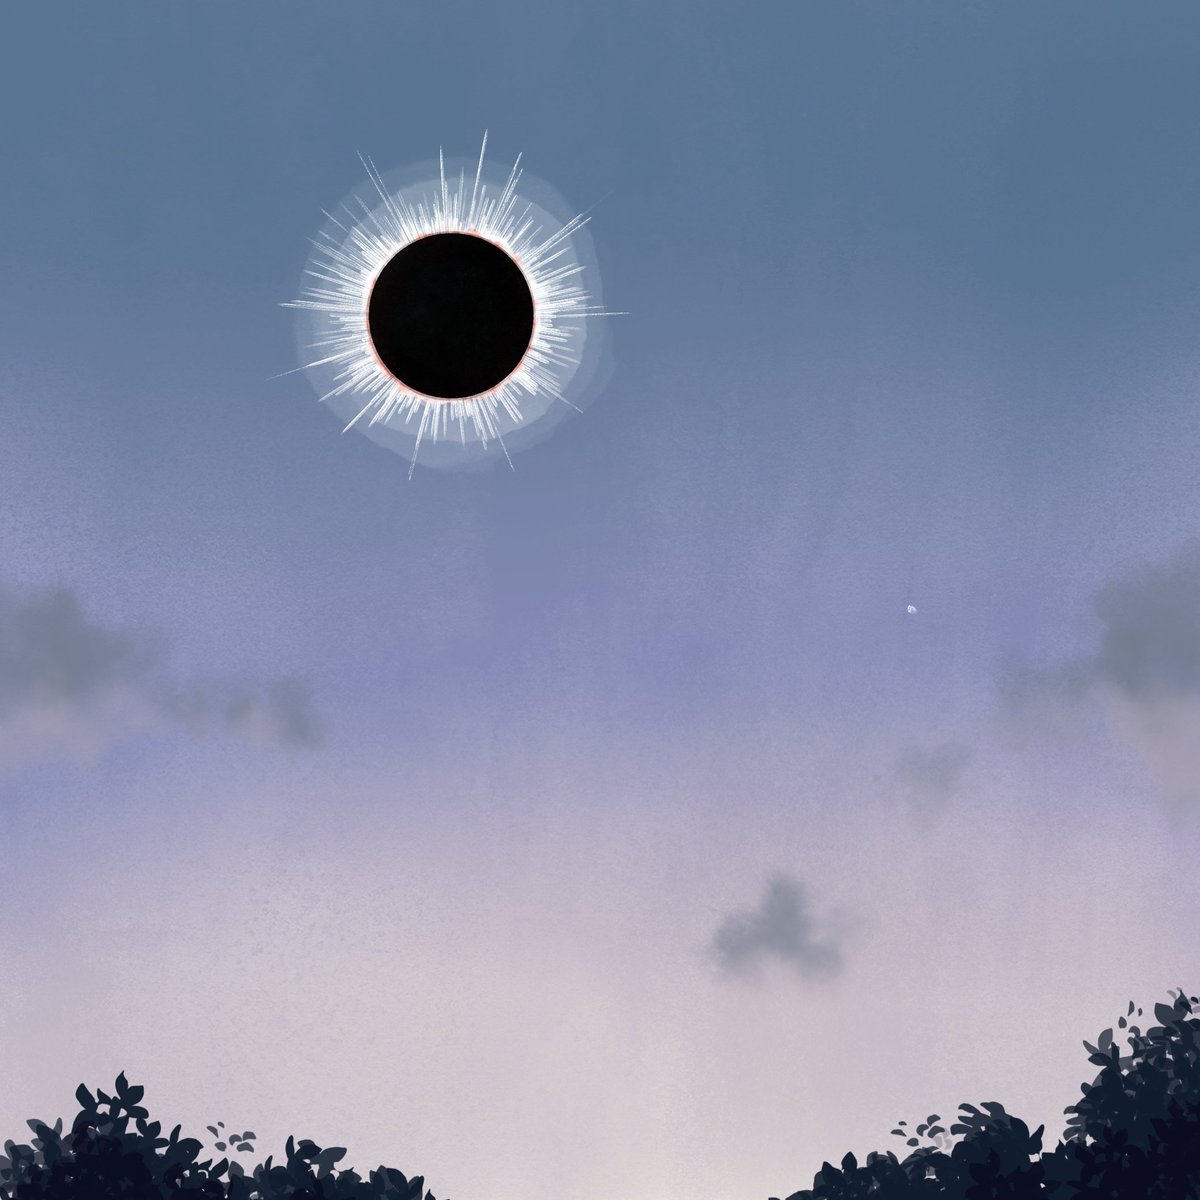 Painted the eclipse from memory and some really shitty blurry photos for pleinairpril lol. The thing that caught my eye the most was all the light rays coming from it.